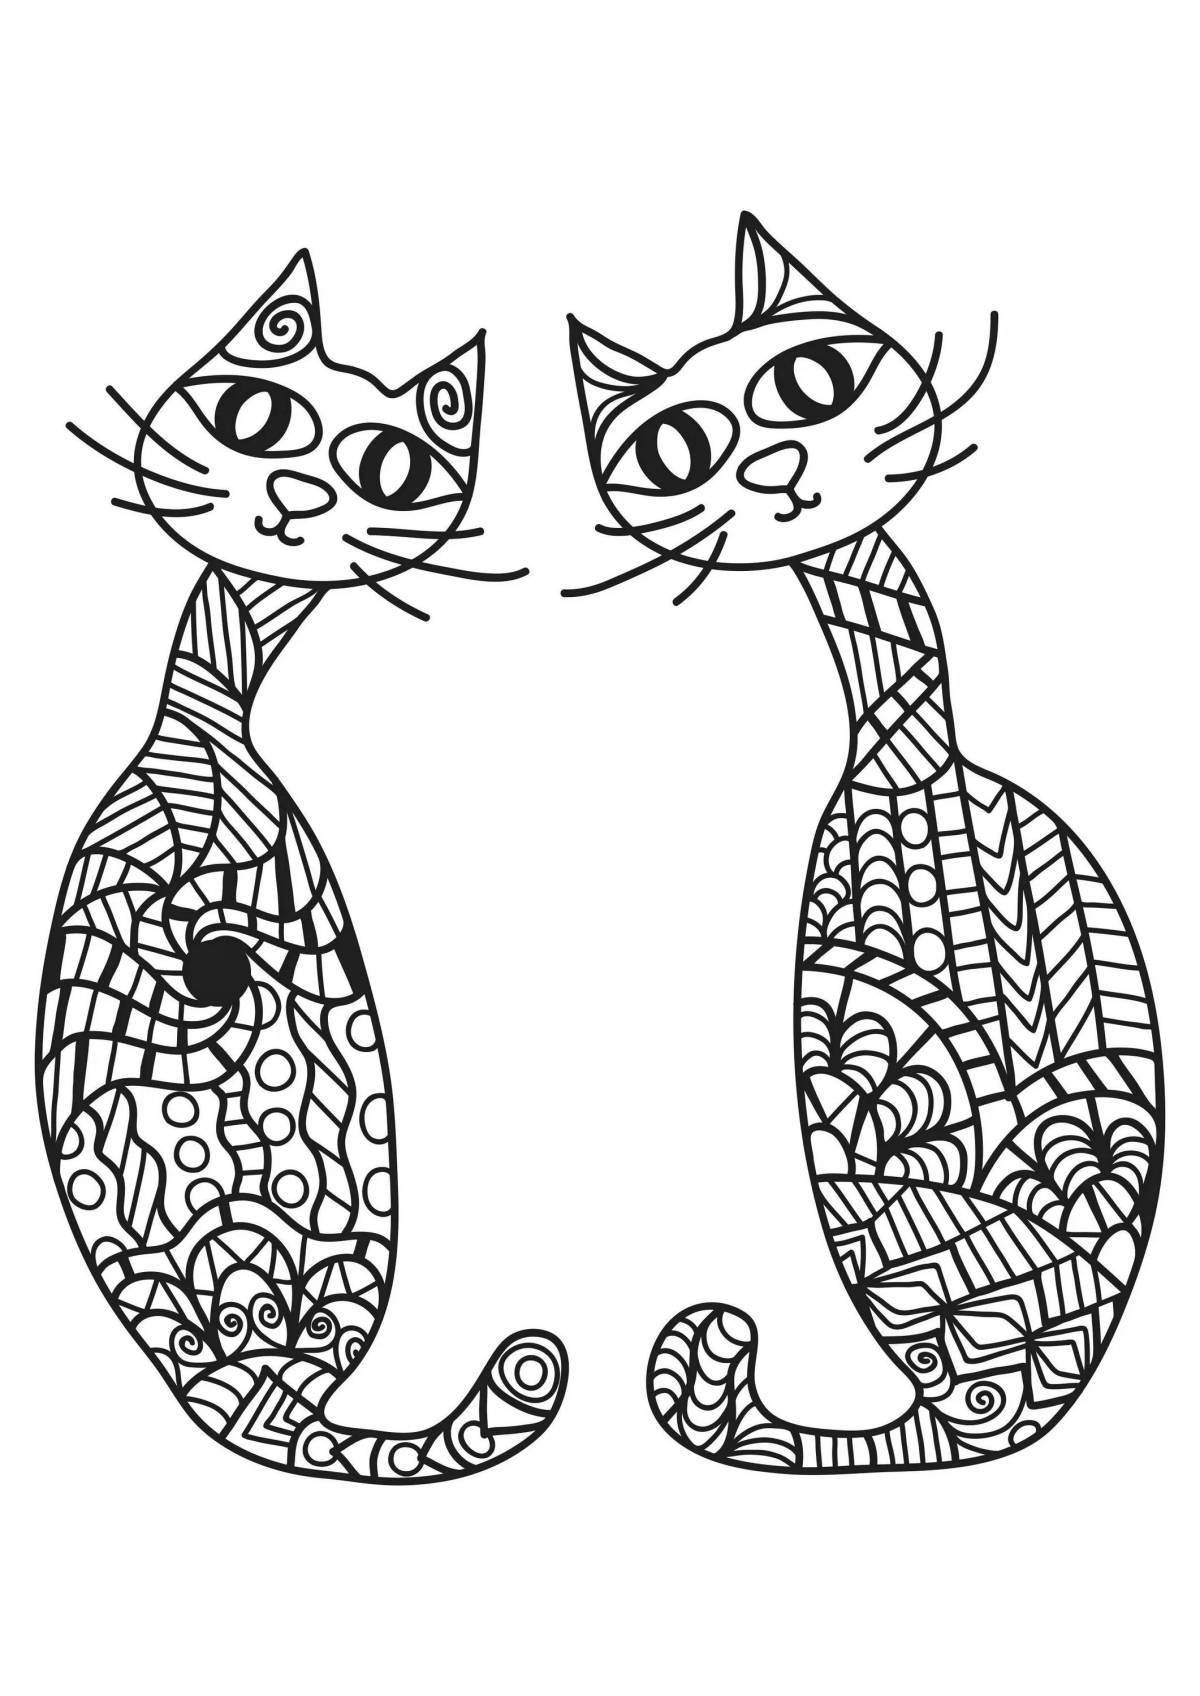 Coloring page family hugging cats